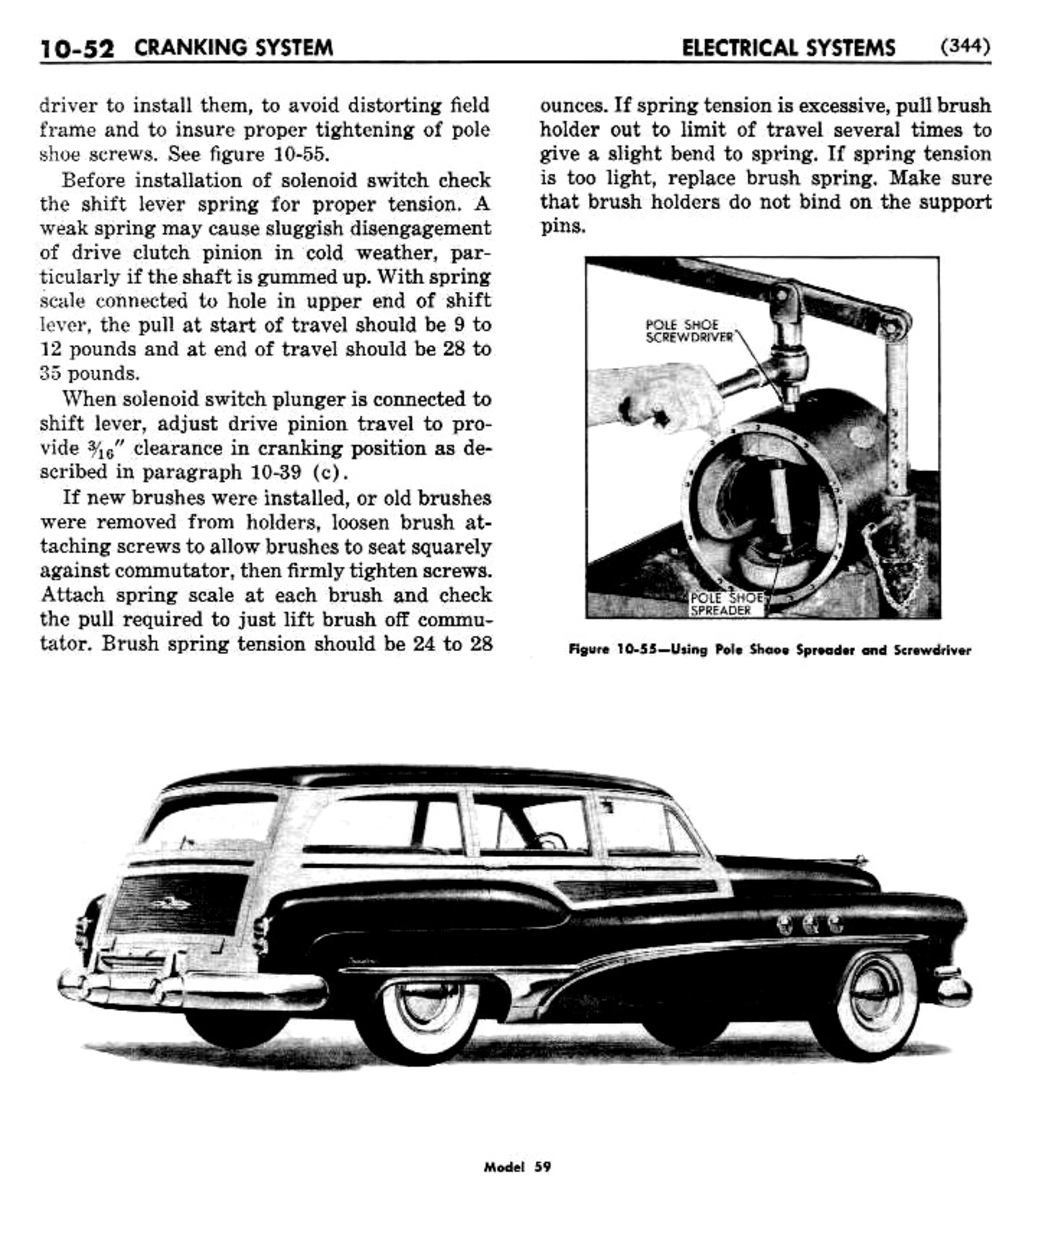 n_11 1951 Buick Shop Manual - Electrical Systems-052-052.jpg